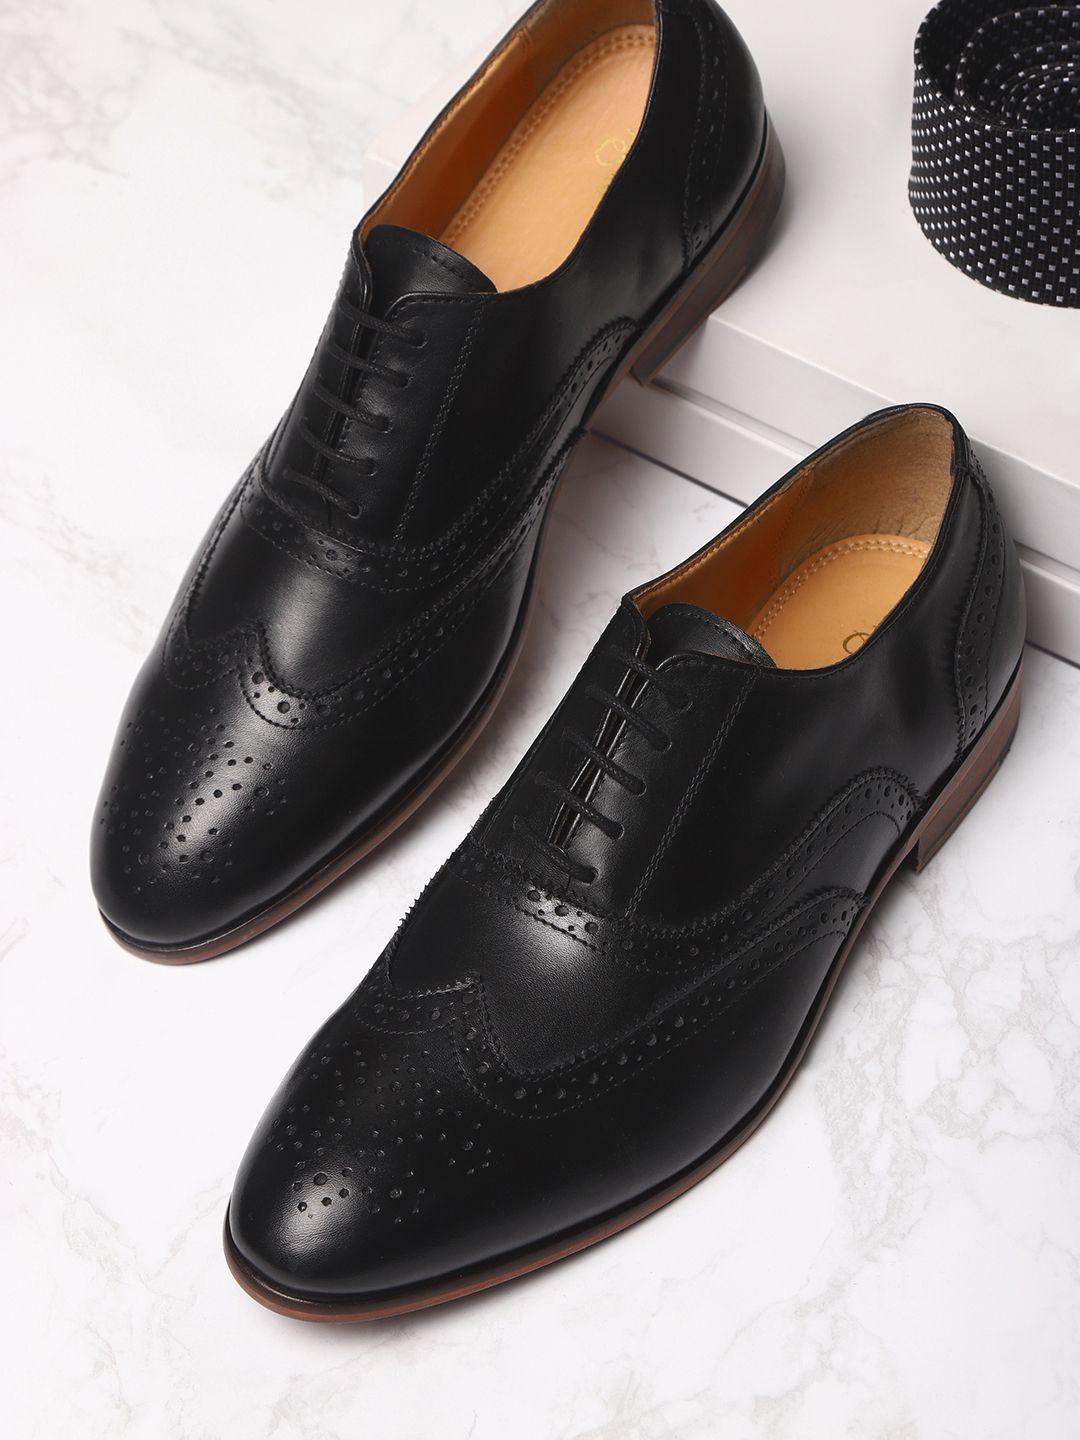 house of pataudi men black leather handcrafted formal brogues